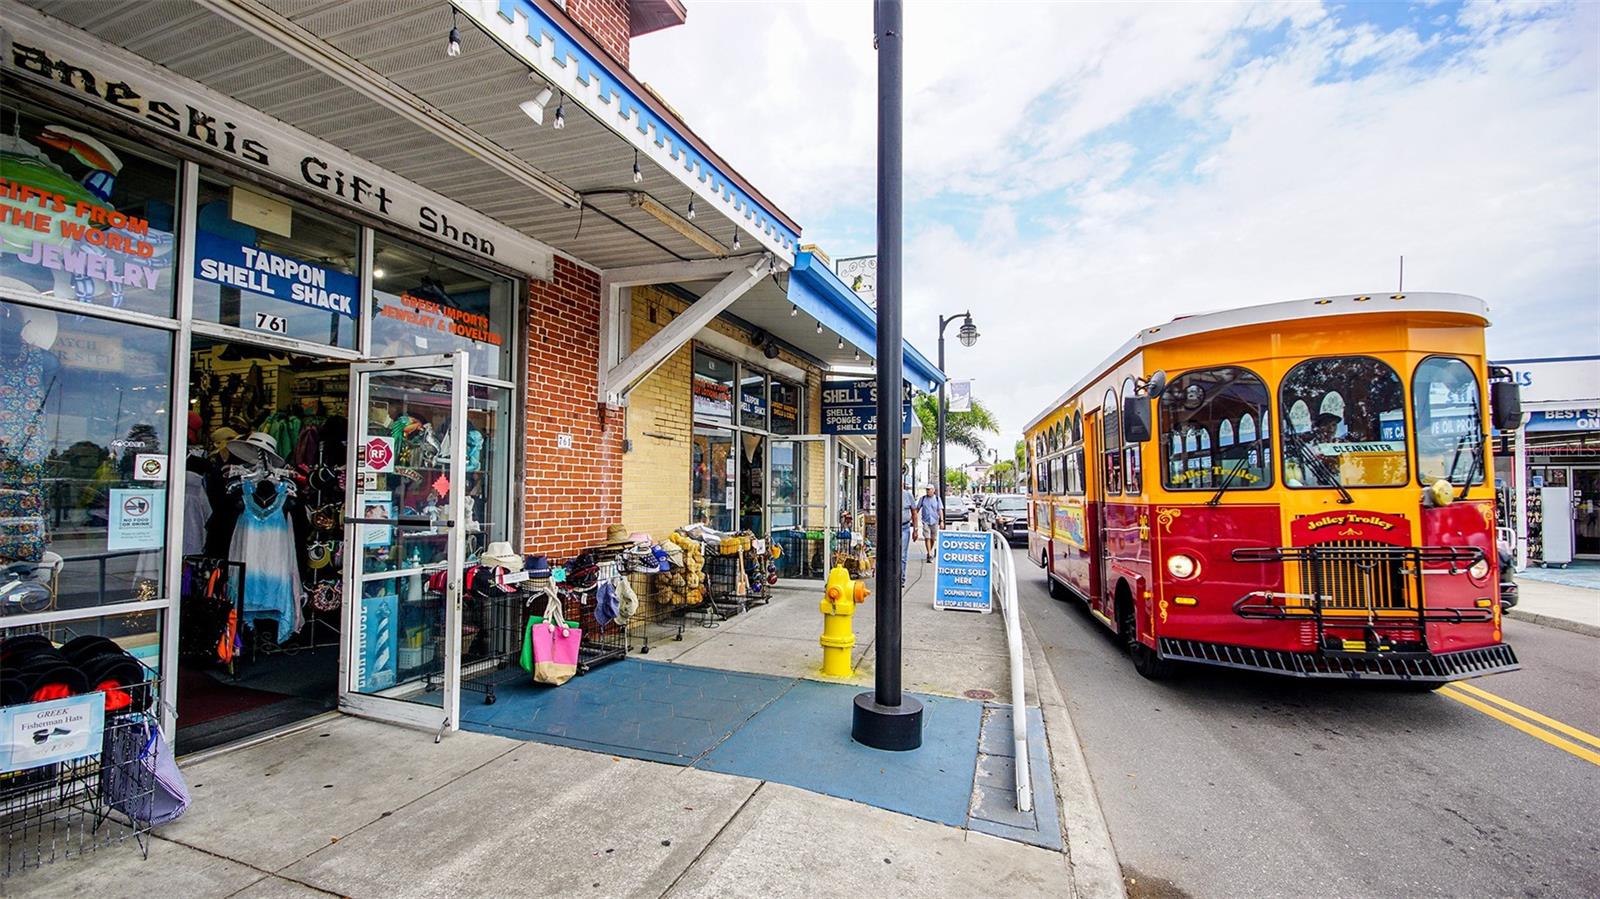 The Sponge Docks are a quick 10 minute drive. You can also enjoy a trip on the Jolly Trolly from Tarpon Springs into Dunedin.